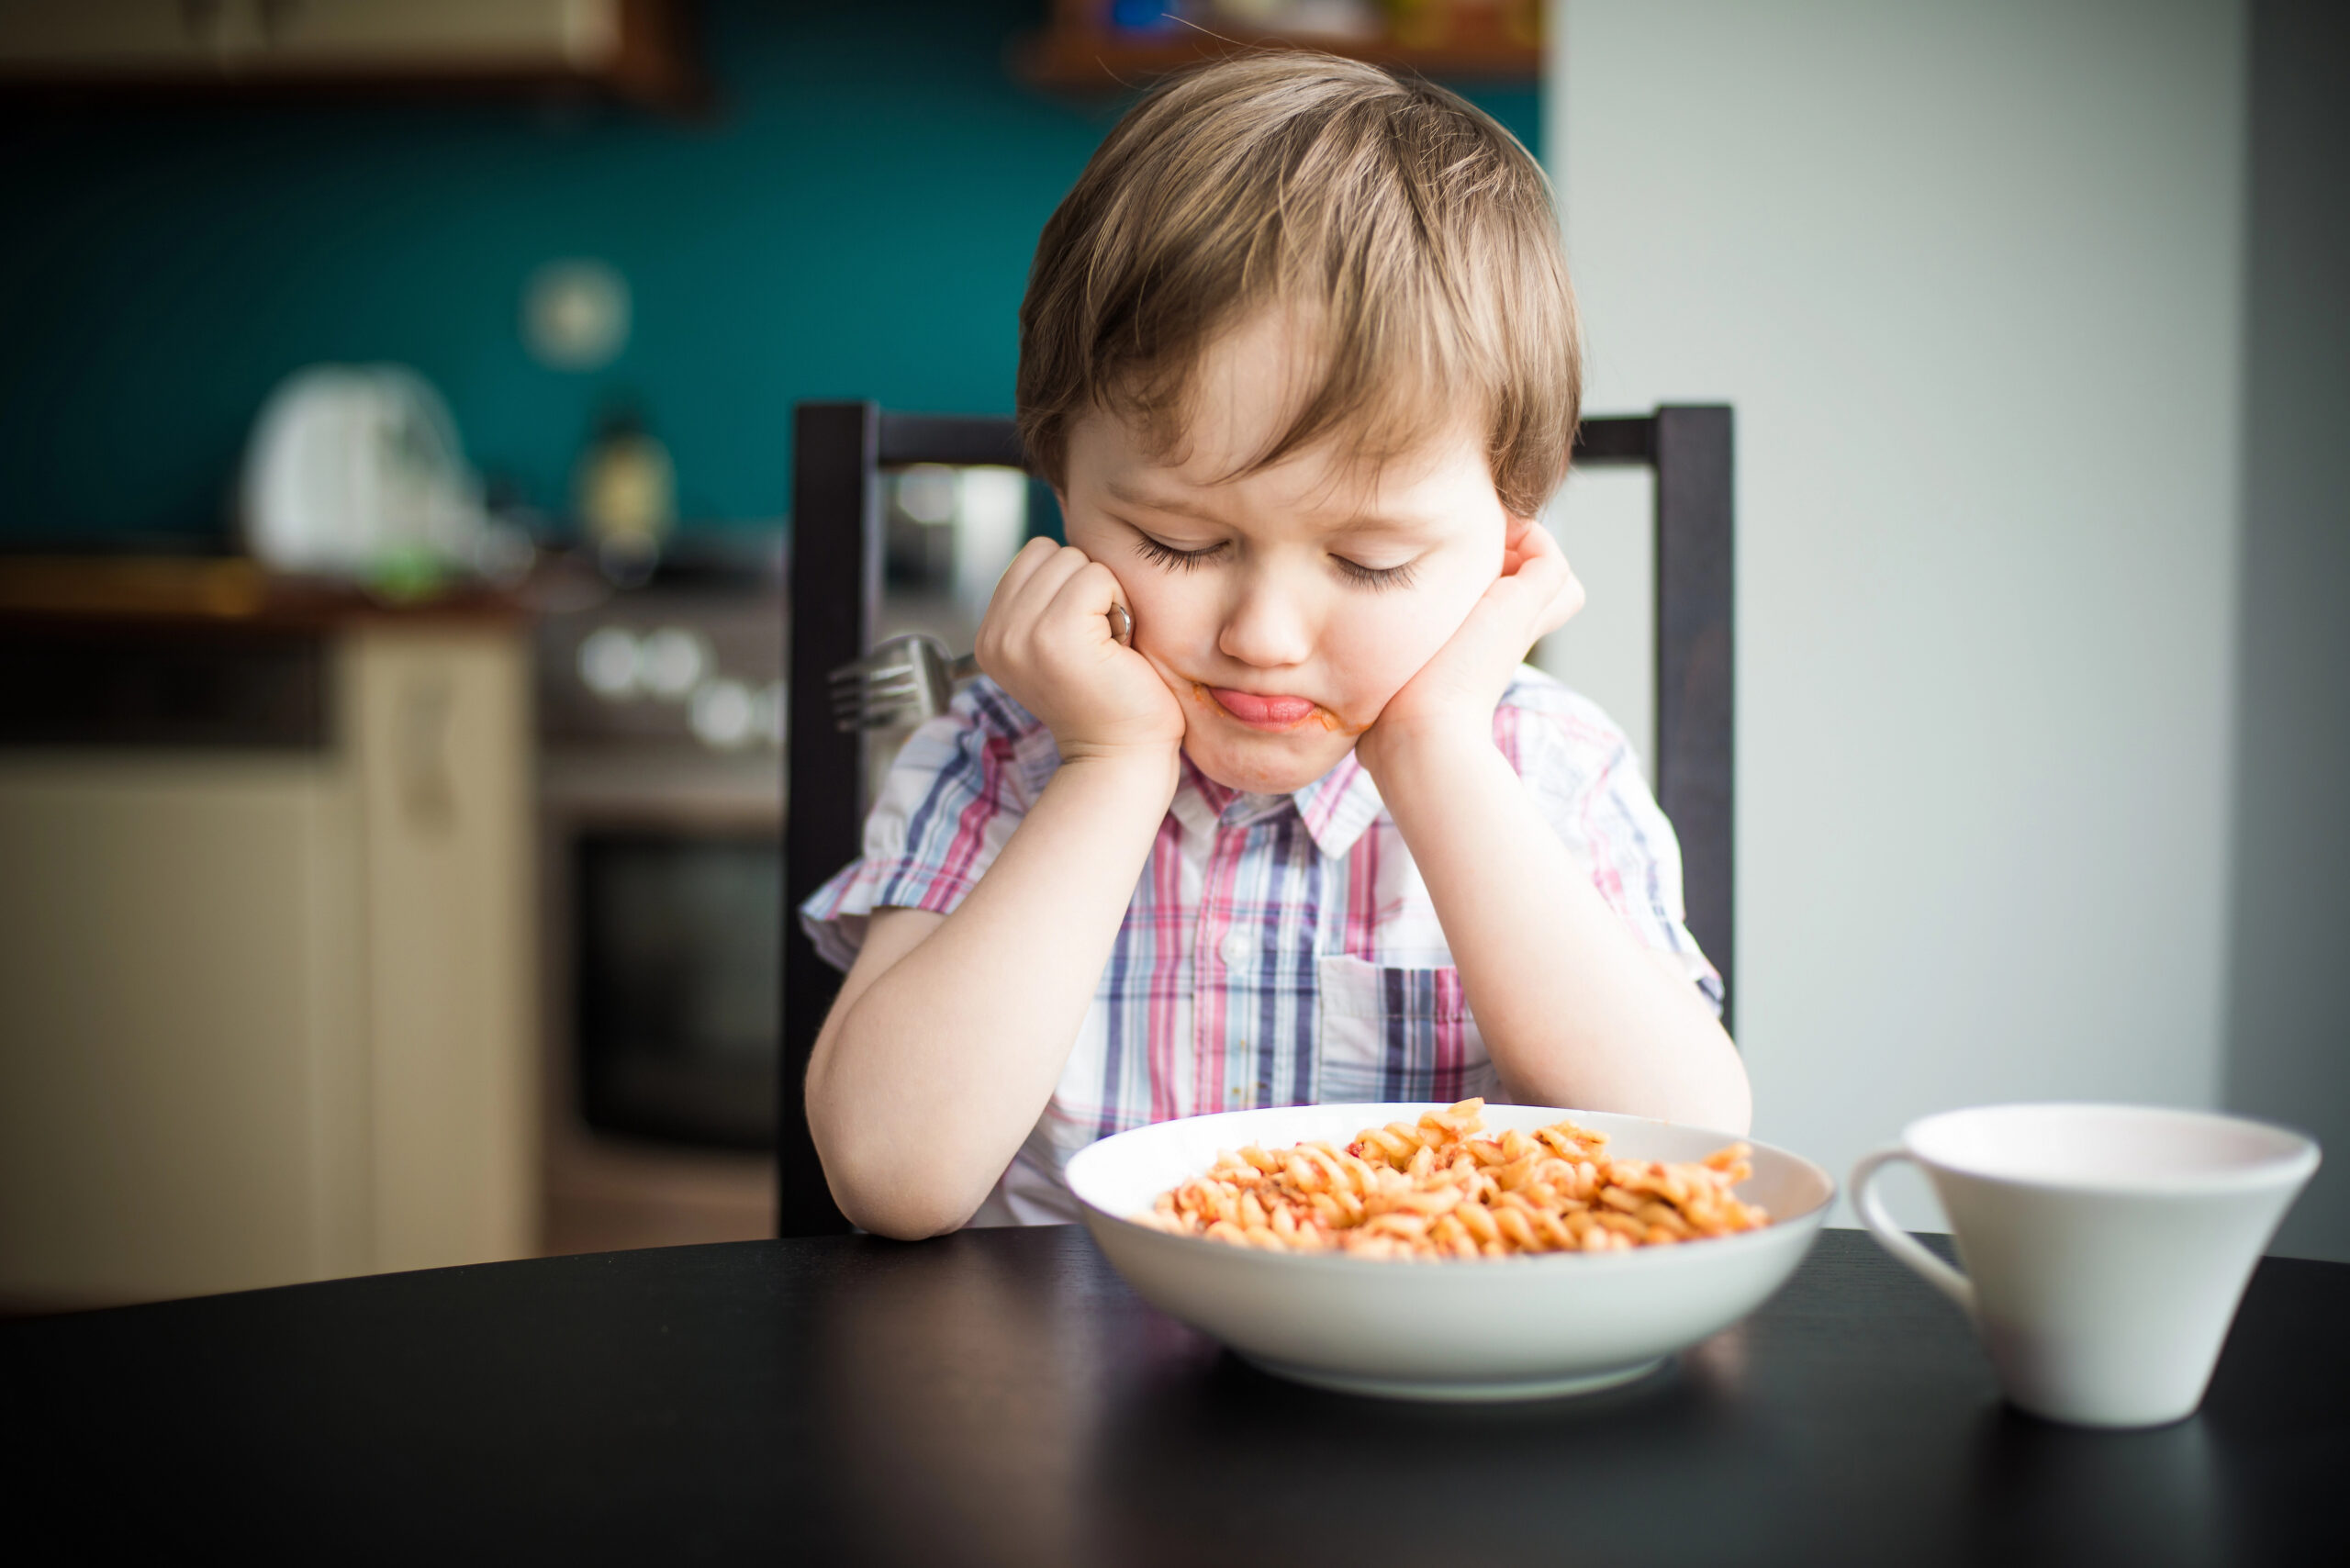 Featured image for “Mealtime Strategies for Children with Sensory Processing Challenges”